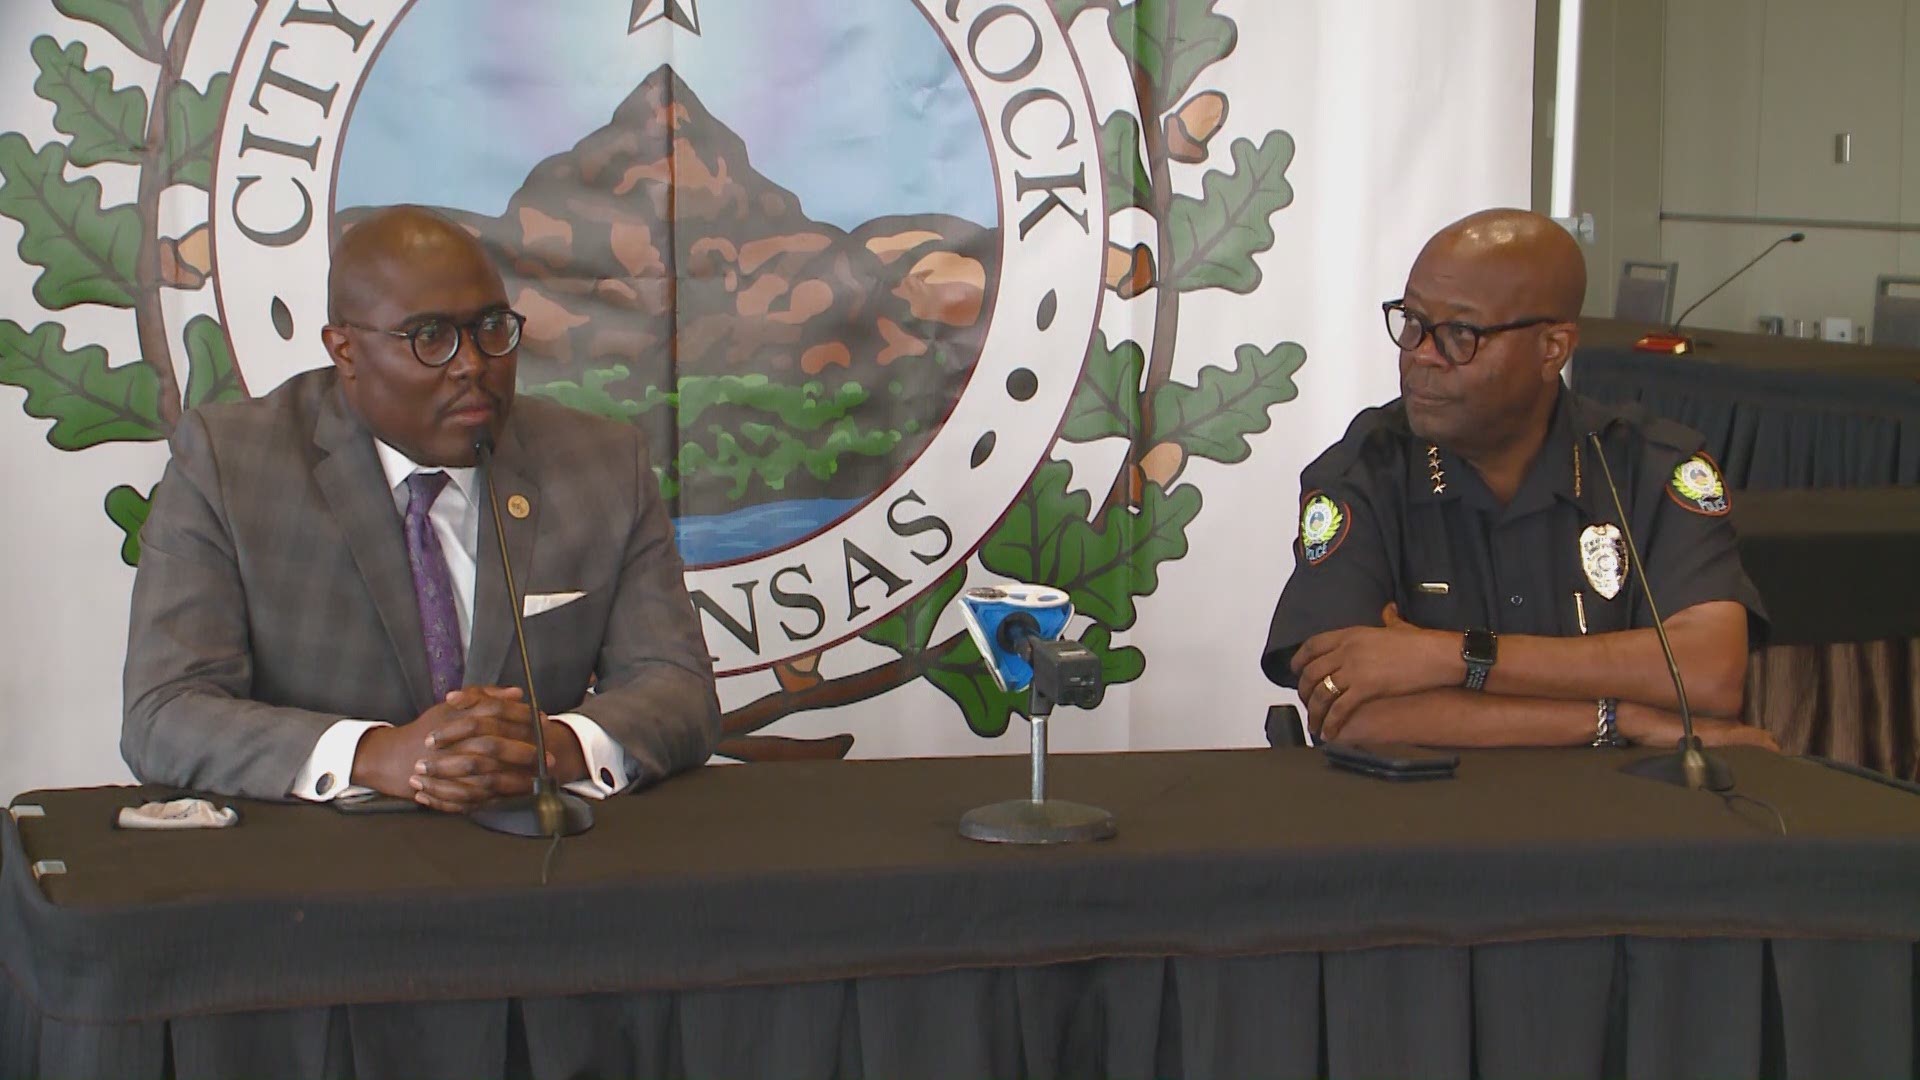 Mayor Scott told reporters that he stands by the peaceful protesters, but he also won't allow violence in his city, saying the city won't be destroyed on his watch.